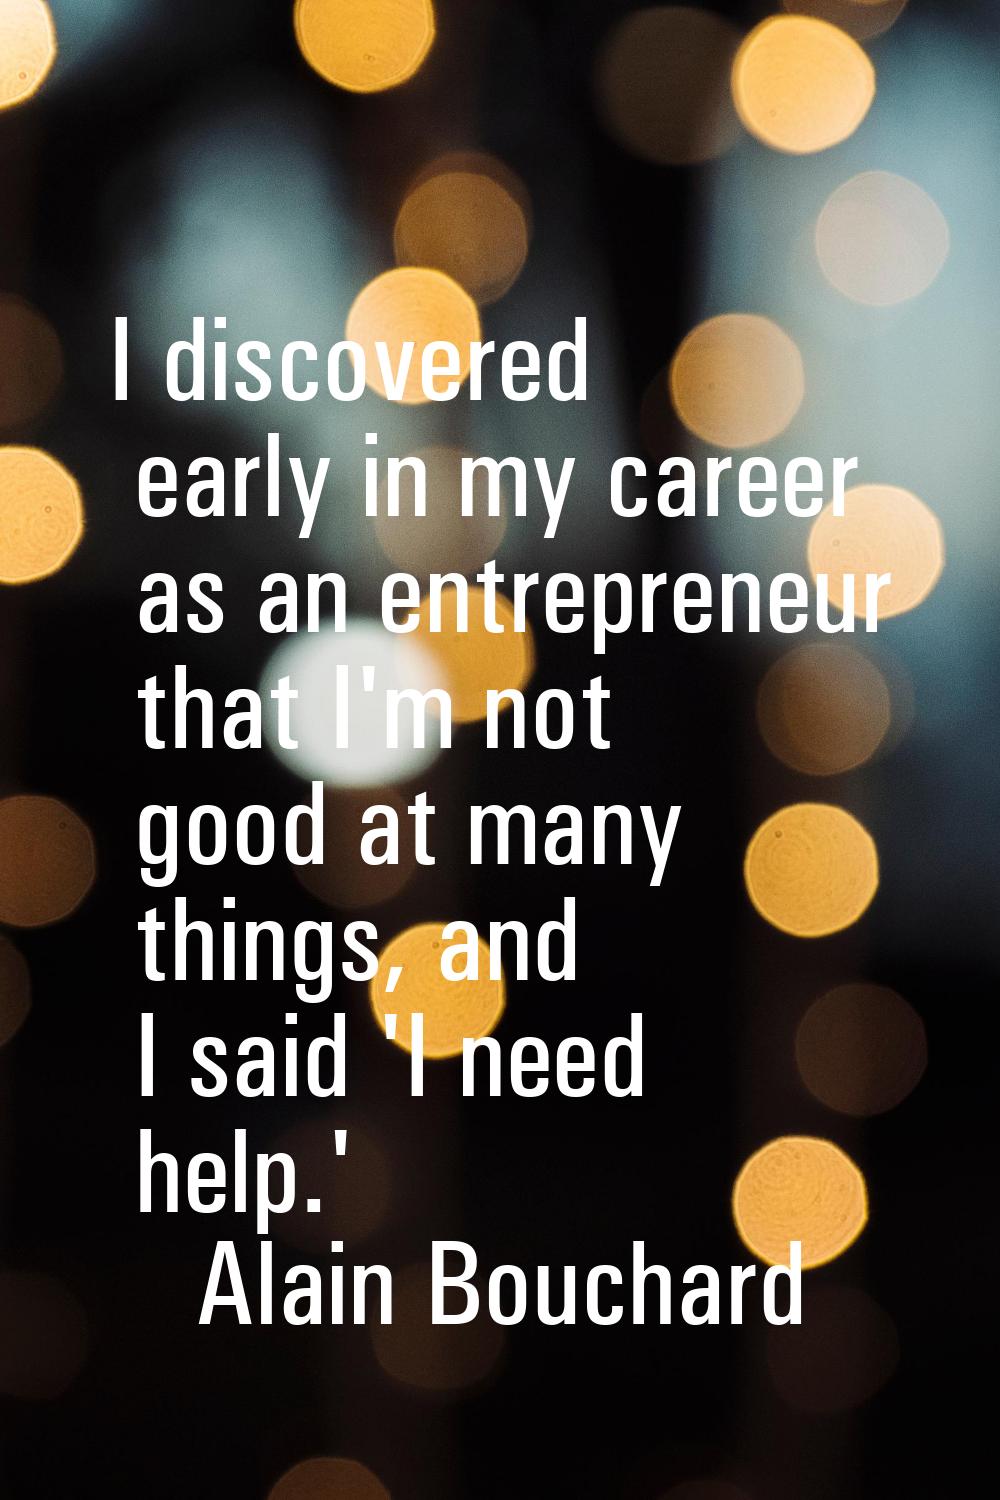 I discovered early in my career as an entrepreneur that I'm not good at many things, and I said 'I 